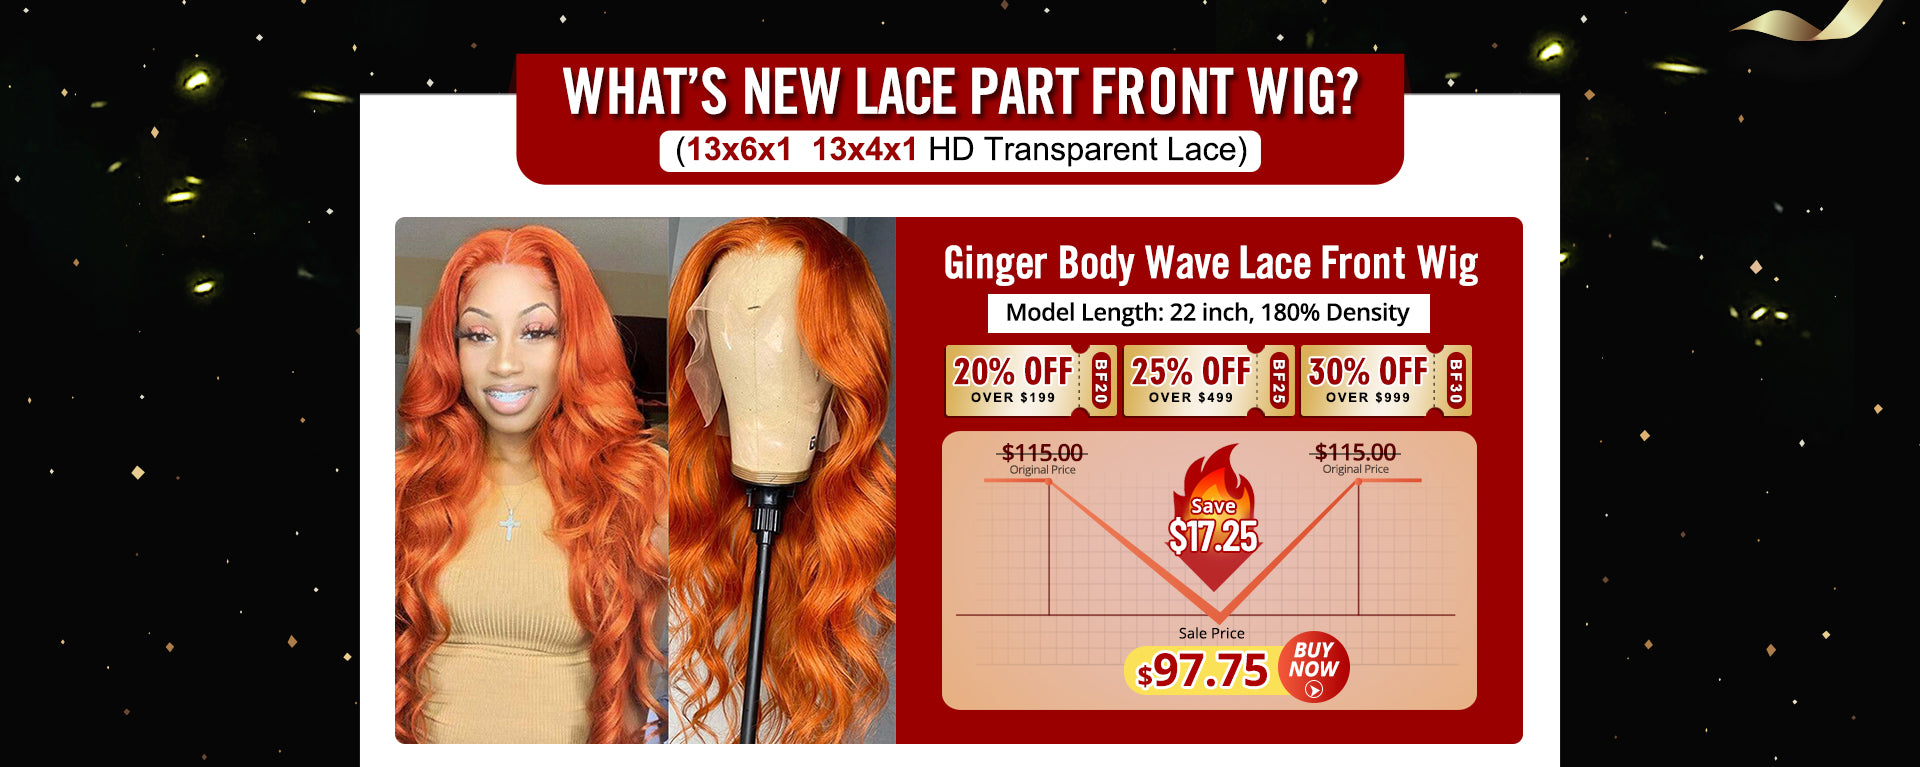 Ginger Body Wave Lace Front Wigs